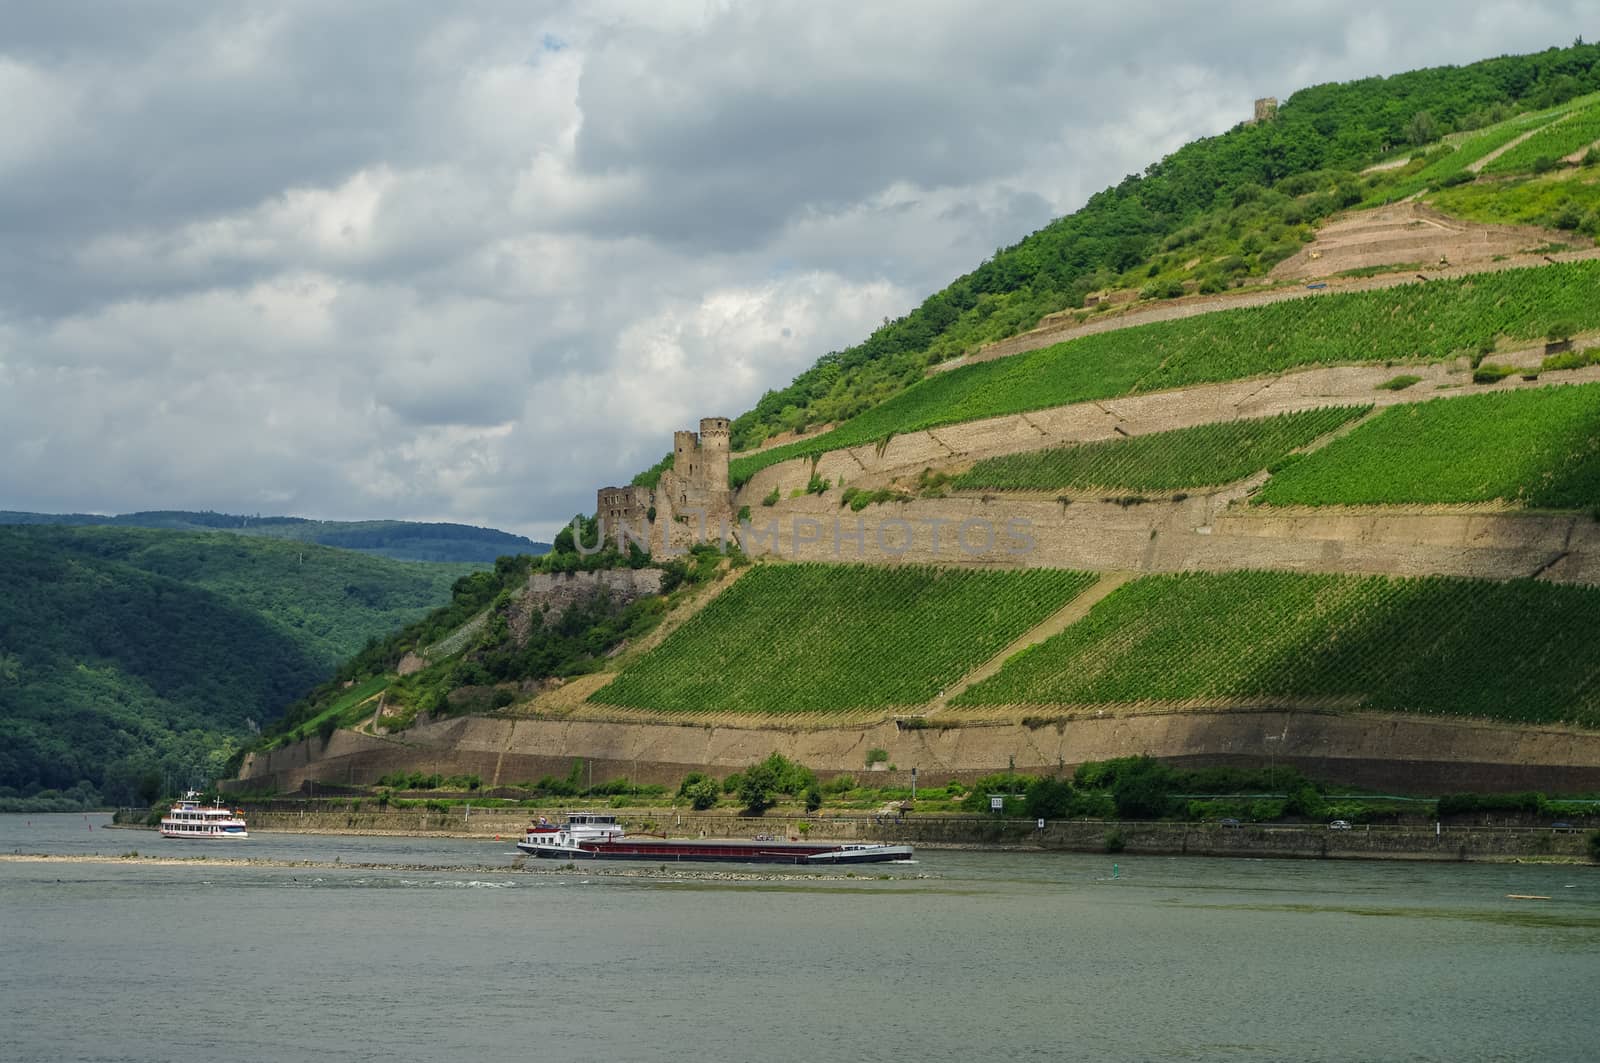 Cargo ship, medieval castle (fortress) Ehrenfels and vineyards o by Smoke666